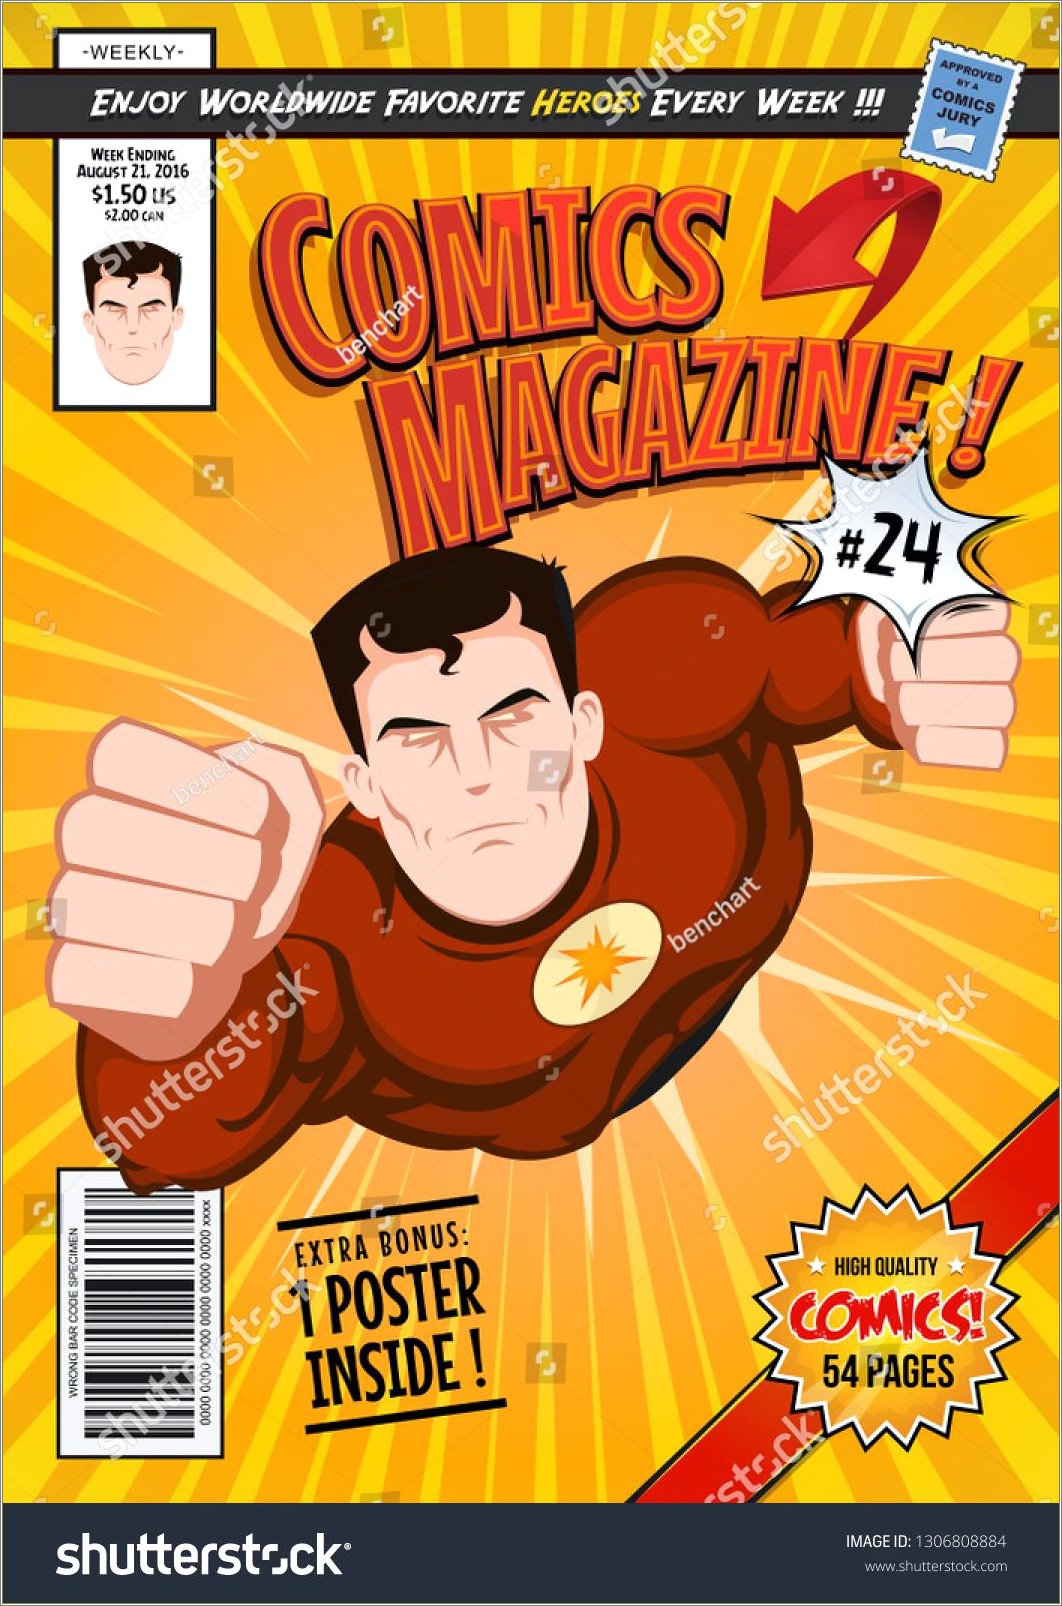 Free Comic Book Cover Template Psd